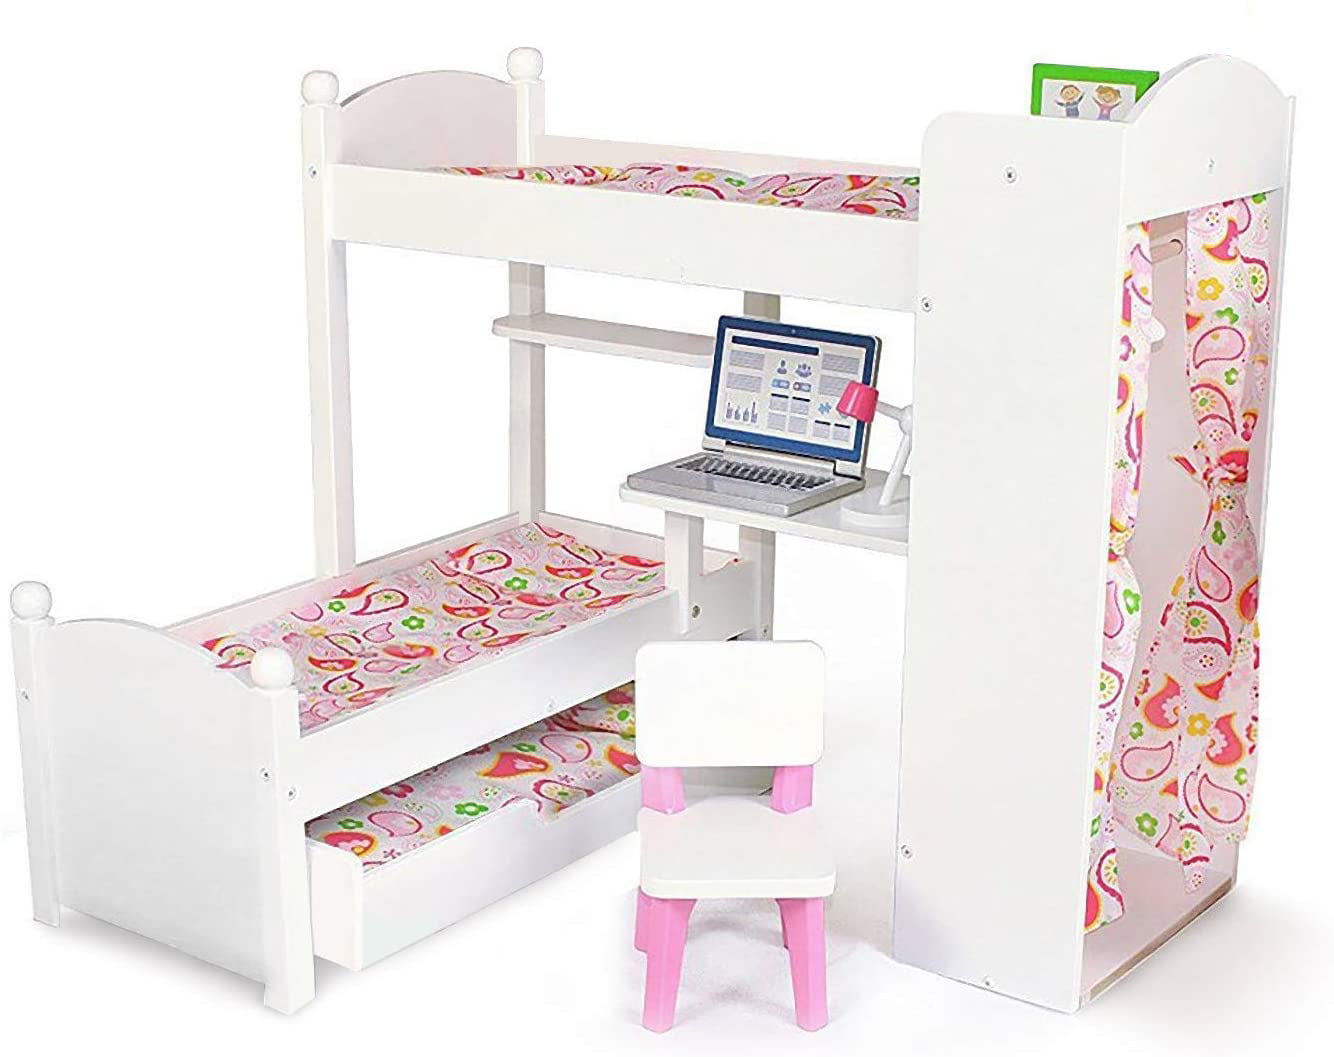 Playtime By Eimmie Wood Bunk Bed, You And Me Baby Doll Bunk Bed